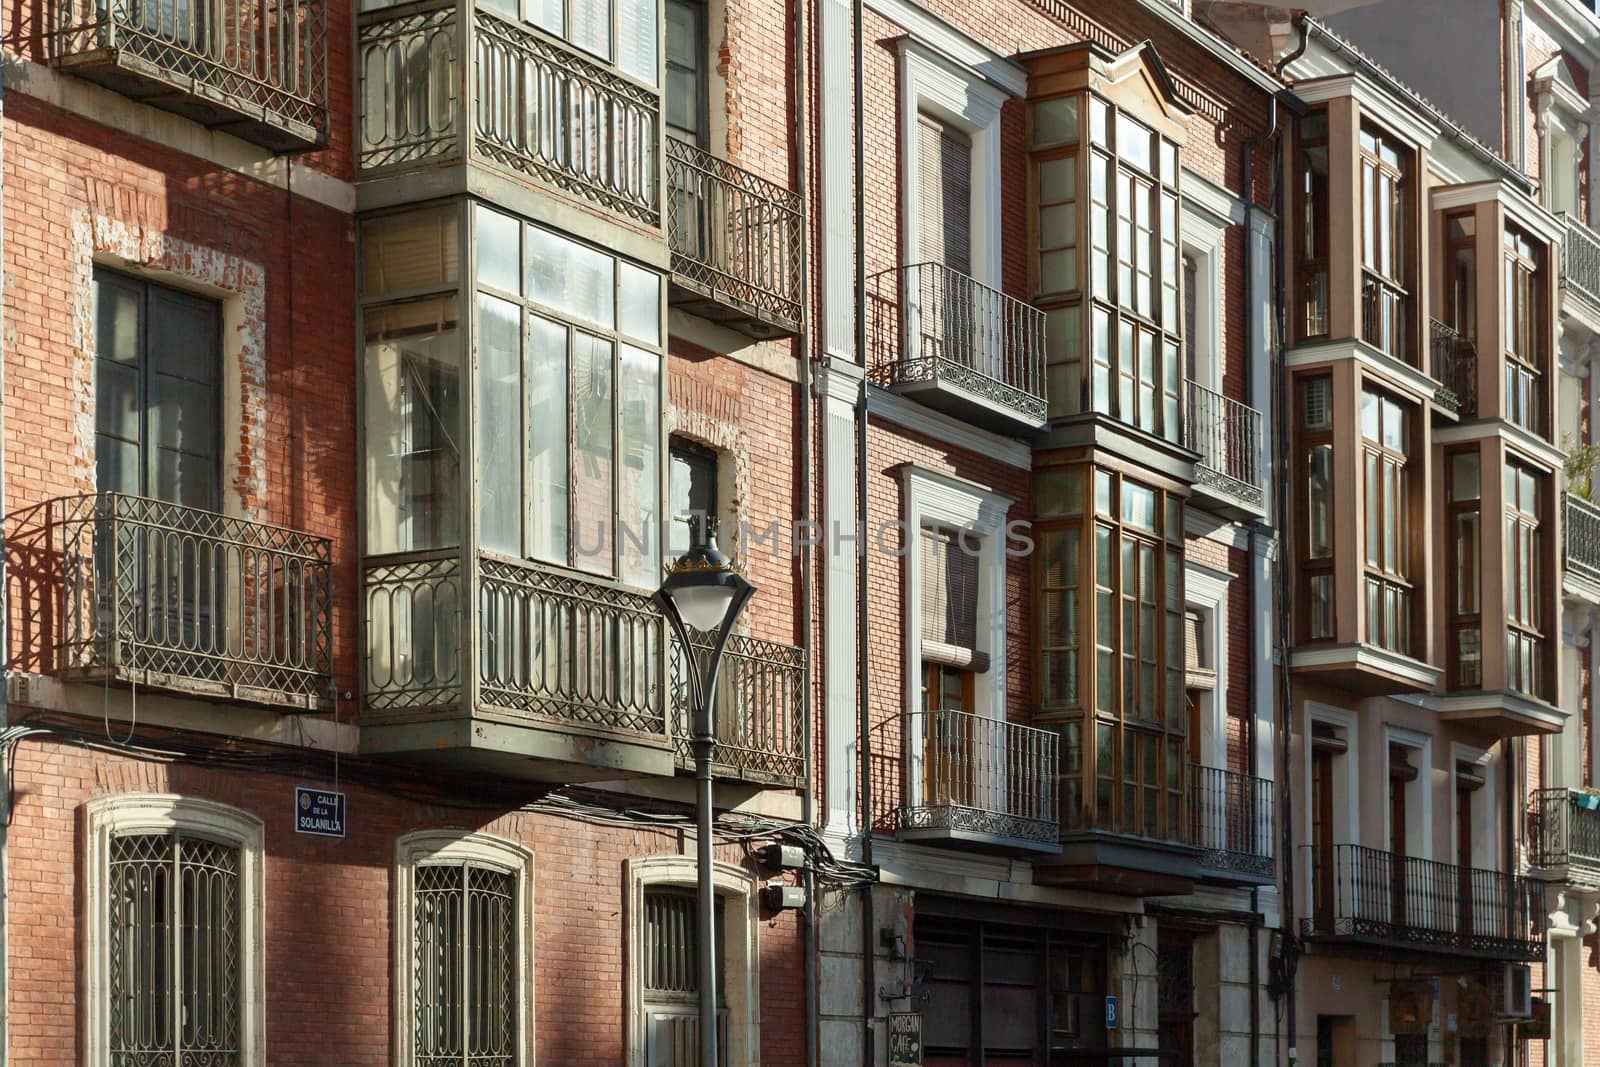 Typical balconies in Northern Spain, Valladolid, Spain by vlad-m